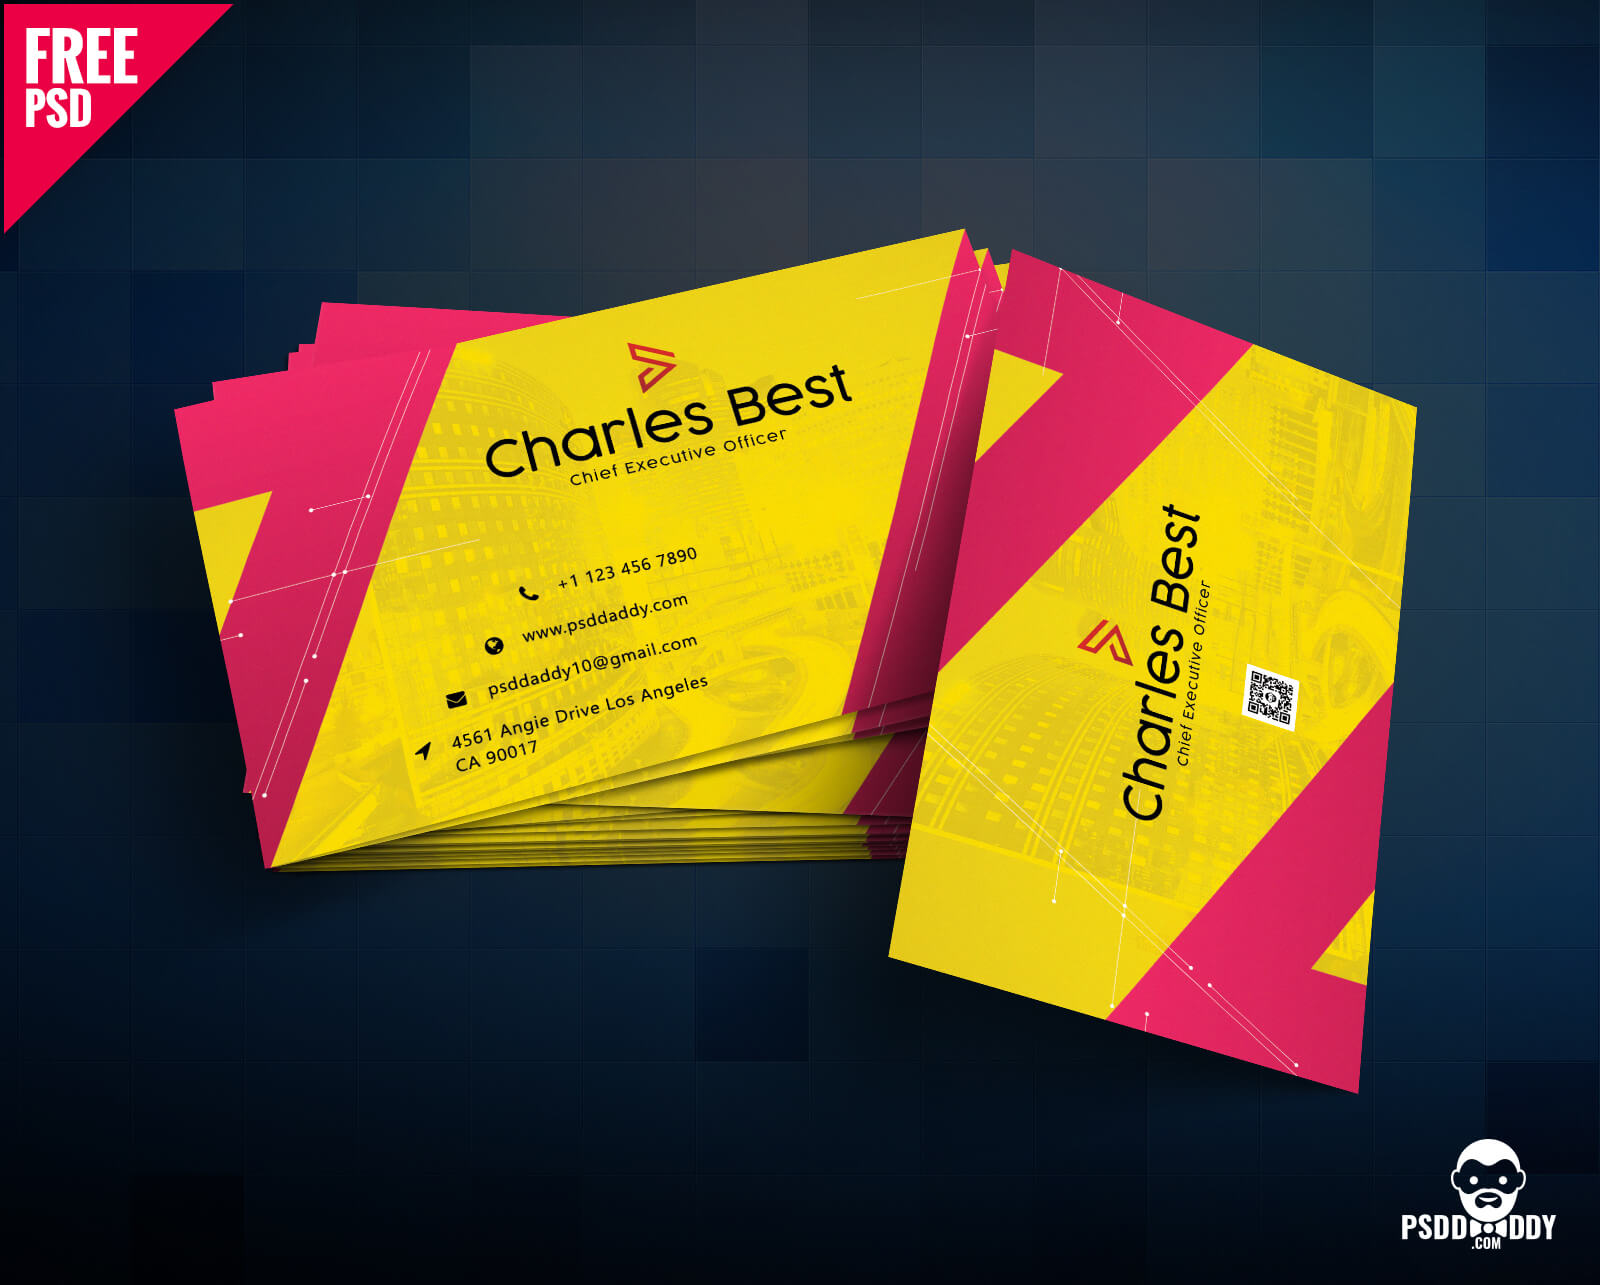 Download] Creative Business Card Free Psd | Psddaddy With Regard To Visiting Card Templates For Photoshop